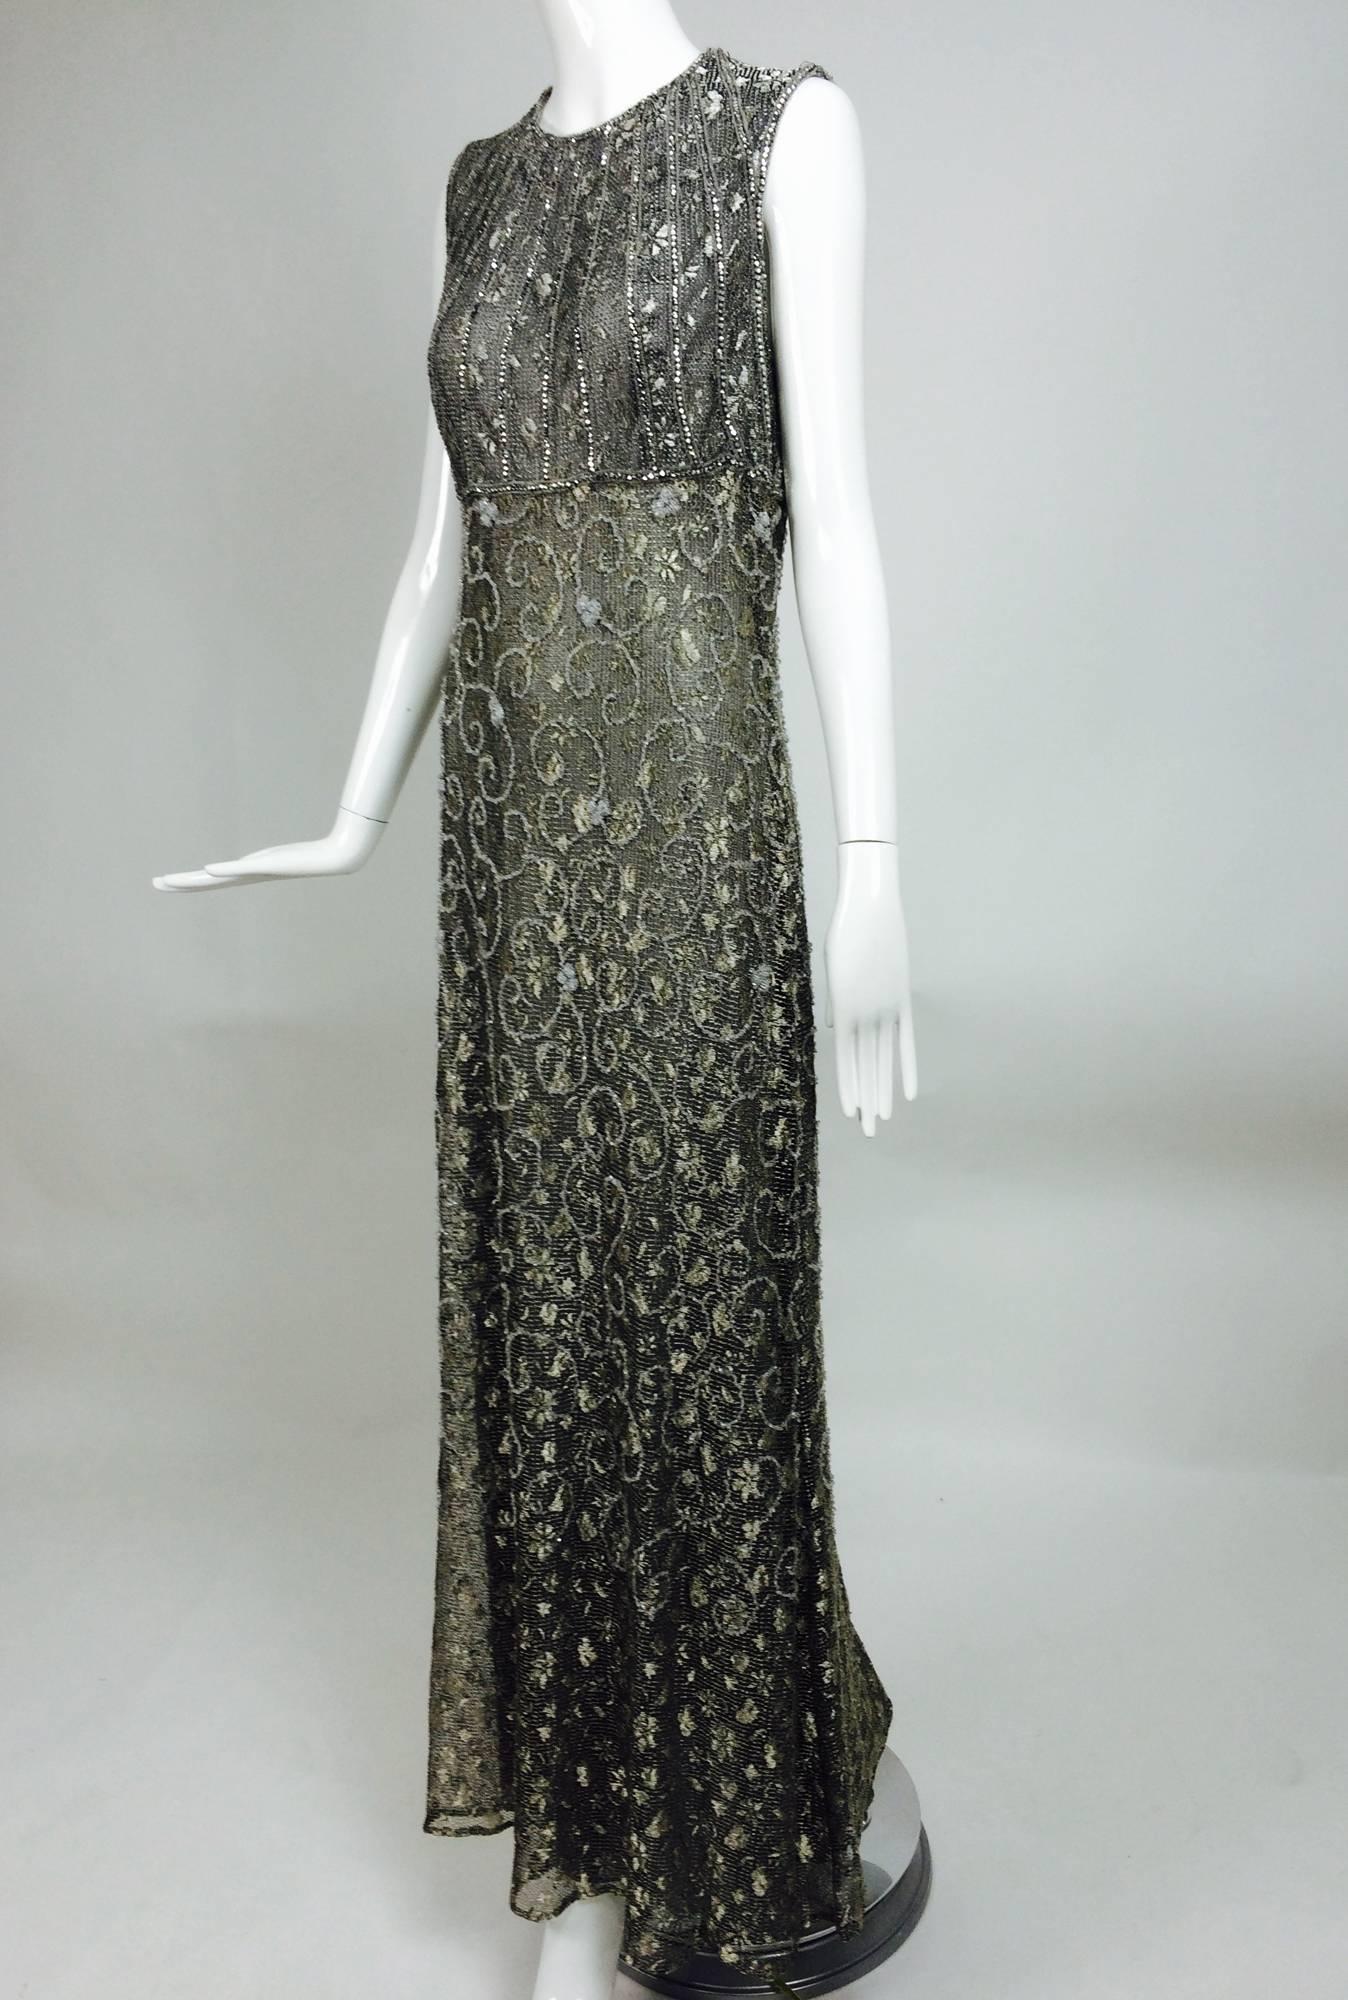 Badgley Mischka embroidered & beaded silver metallic lace gown 1